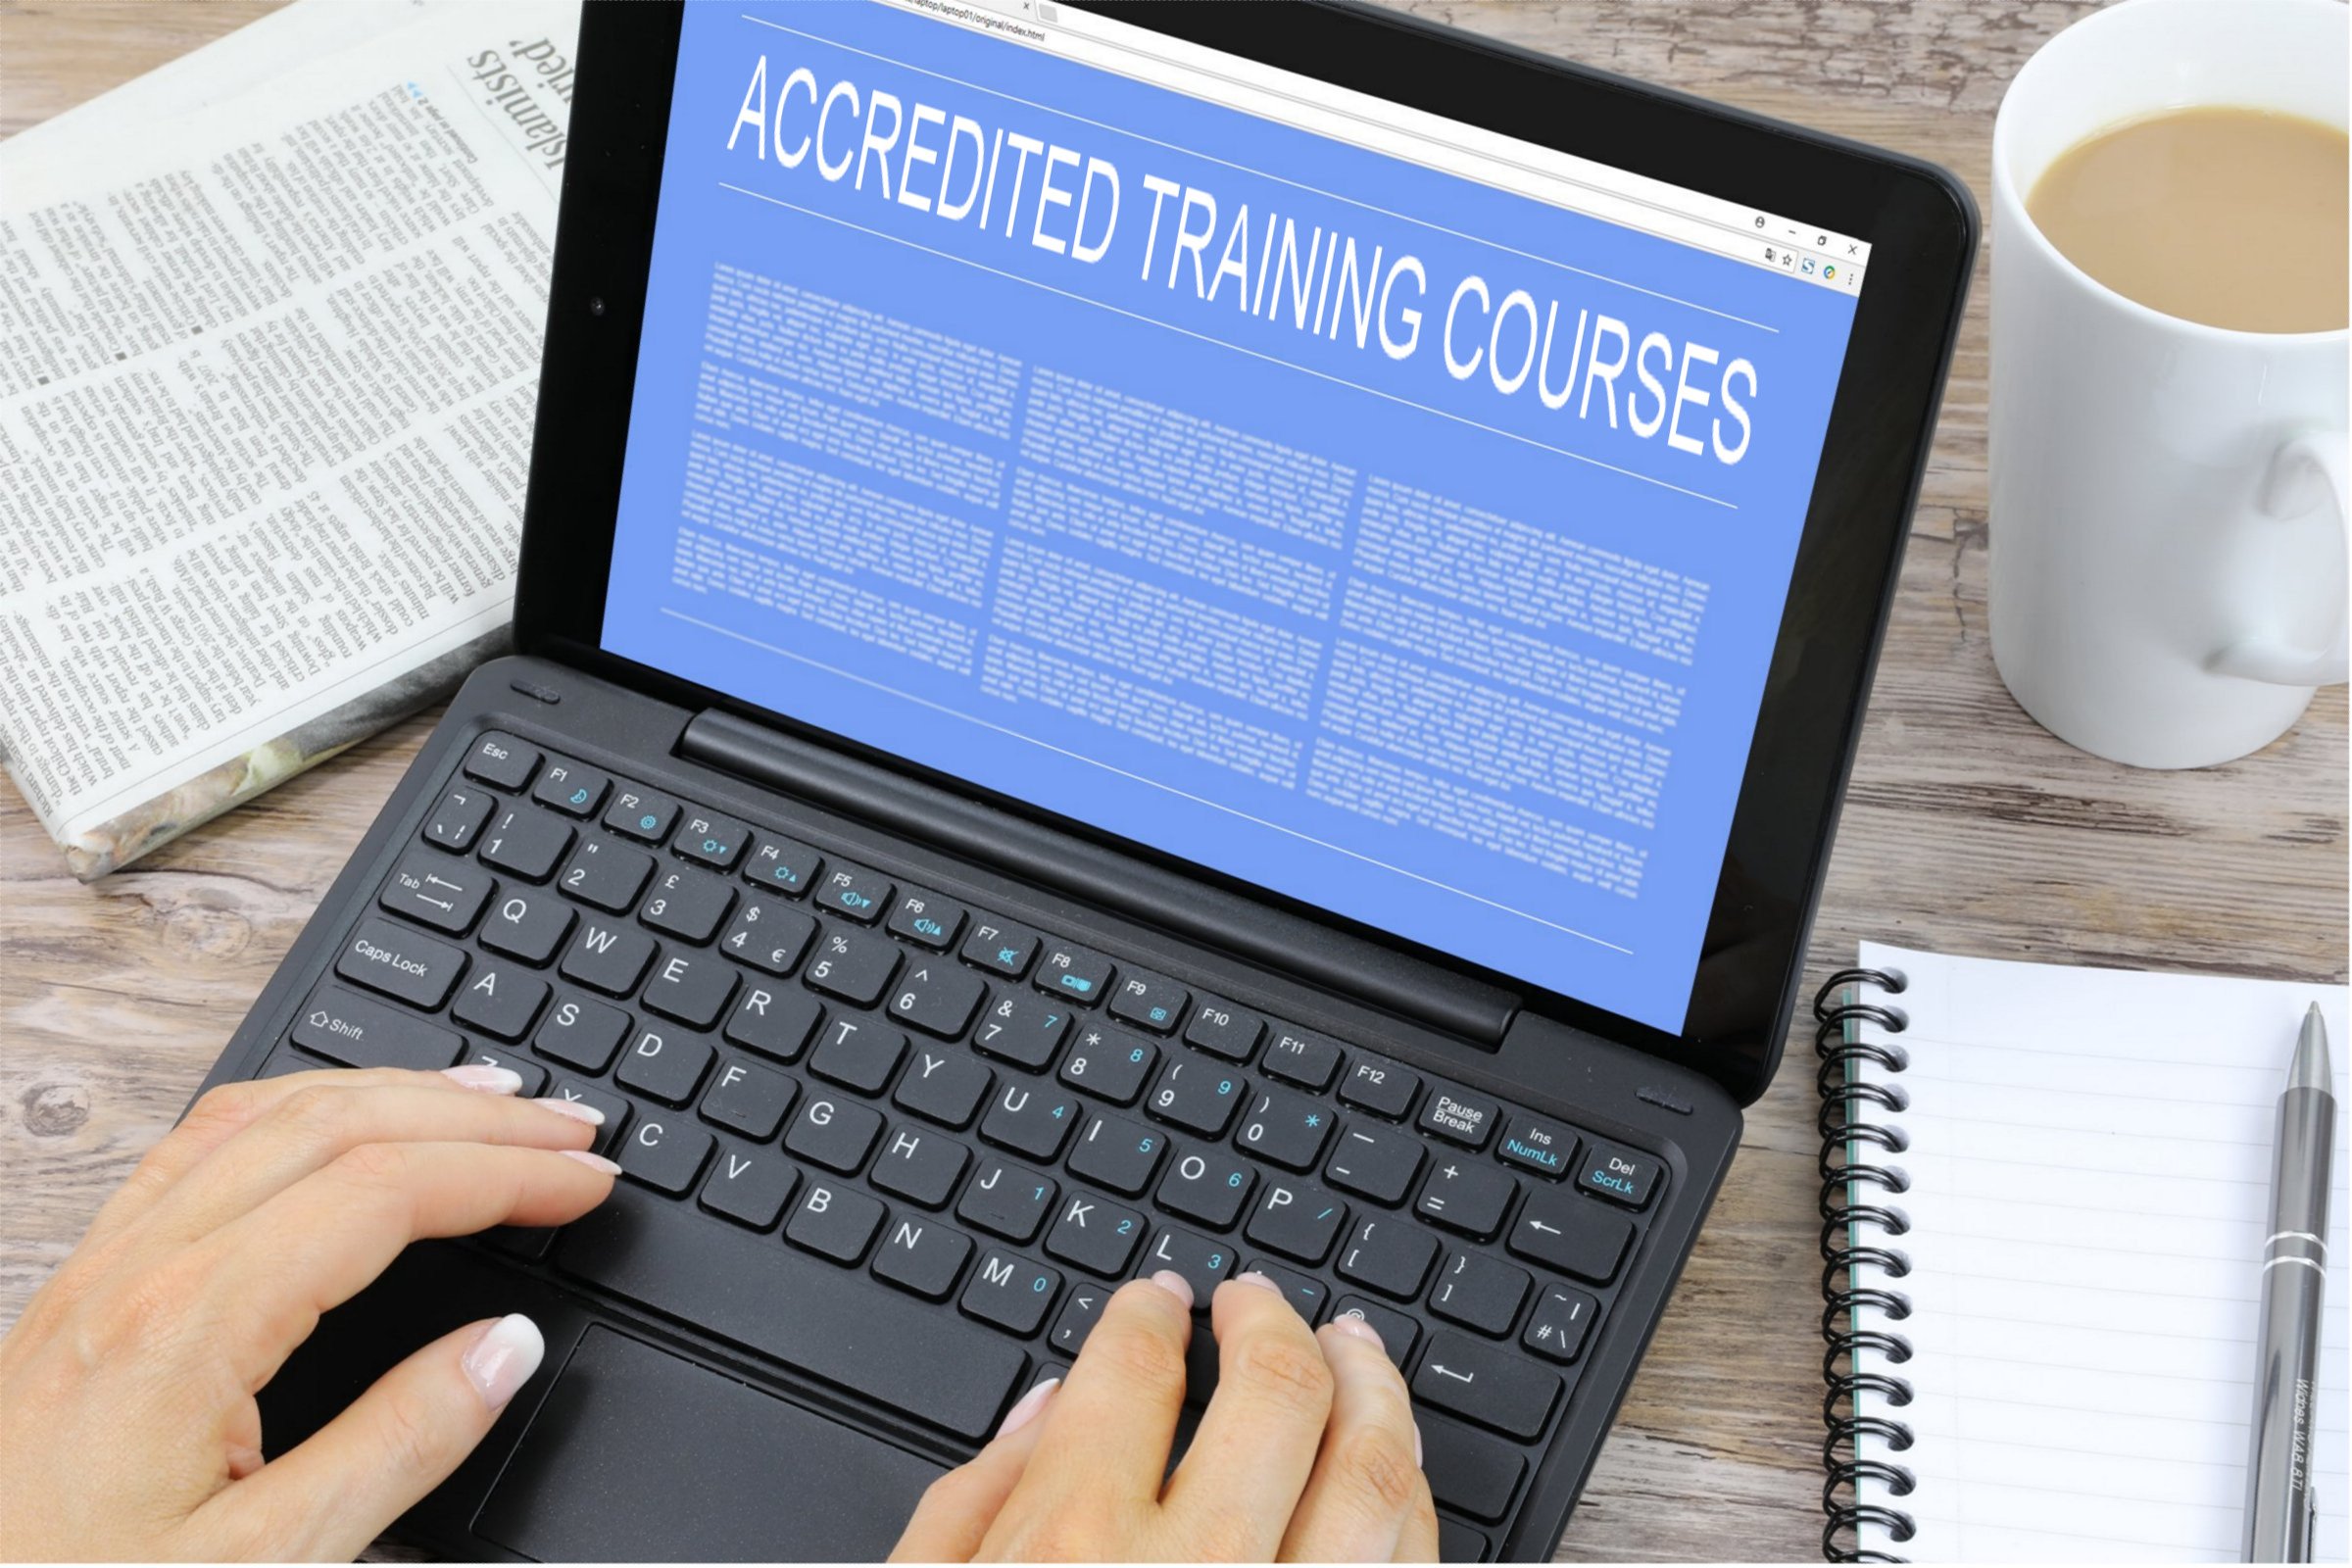 Accredited Training Courses